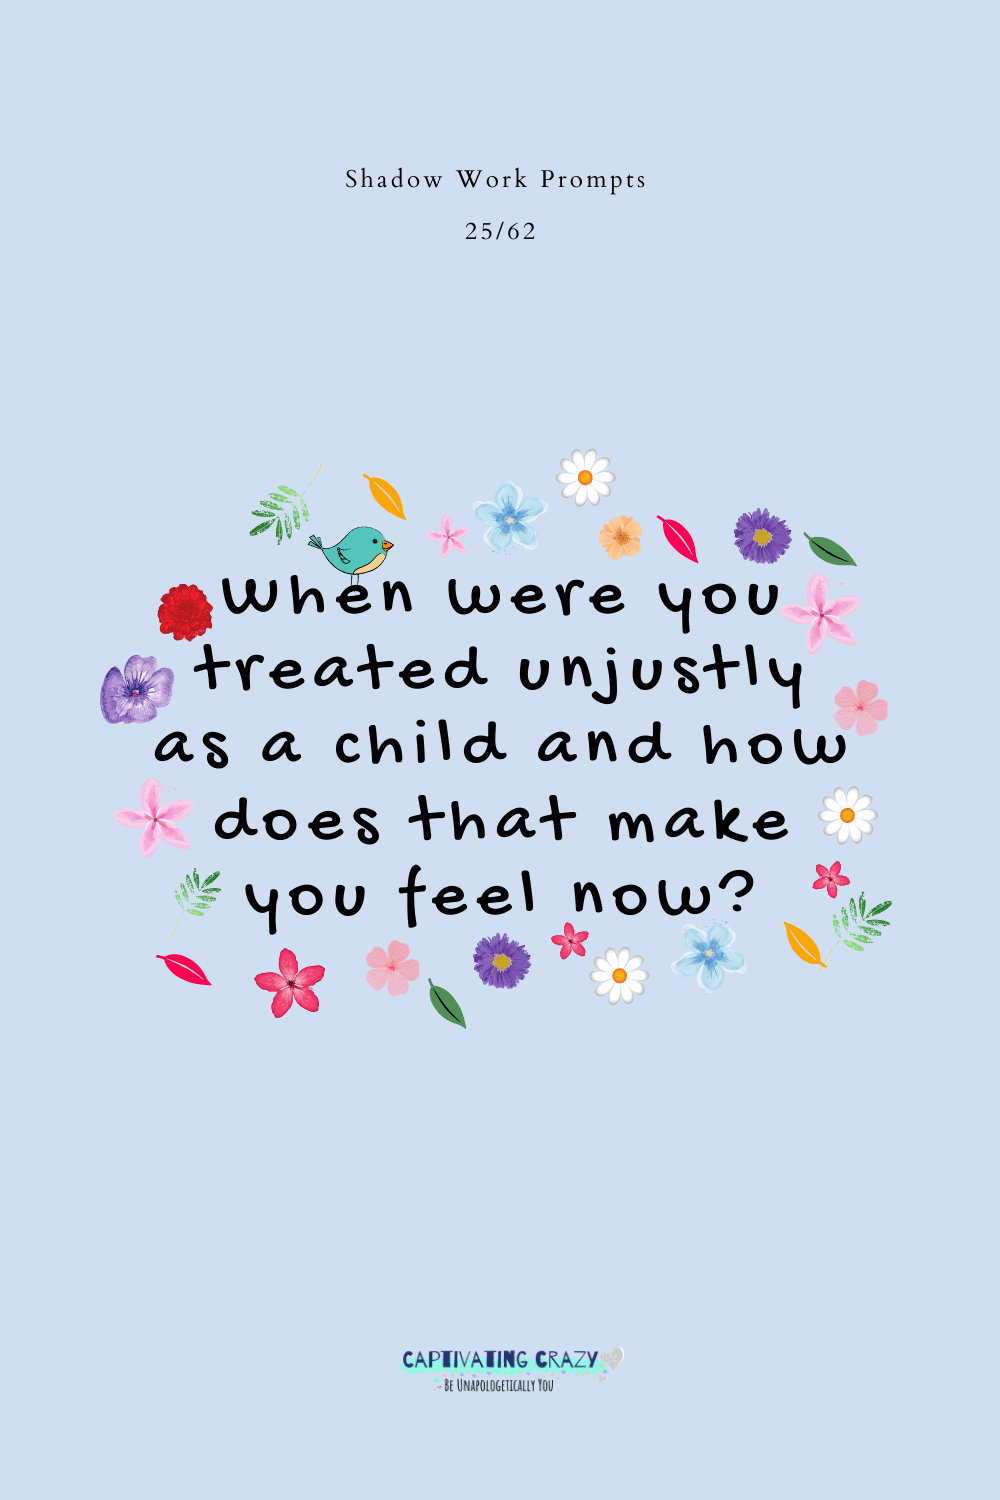 When were you treated unjustly as a child and how does that make you feel now?